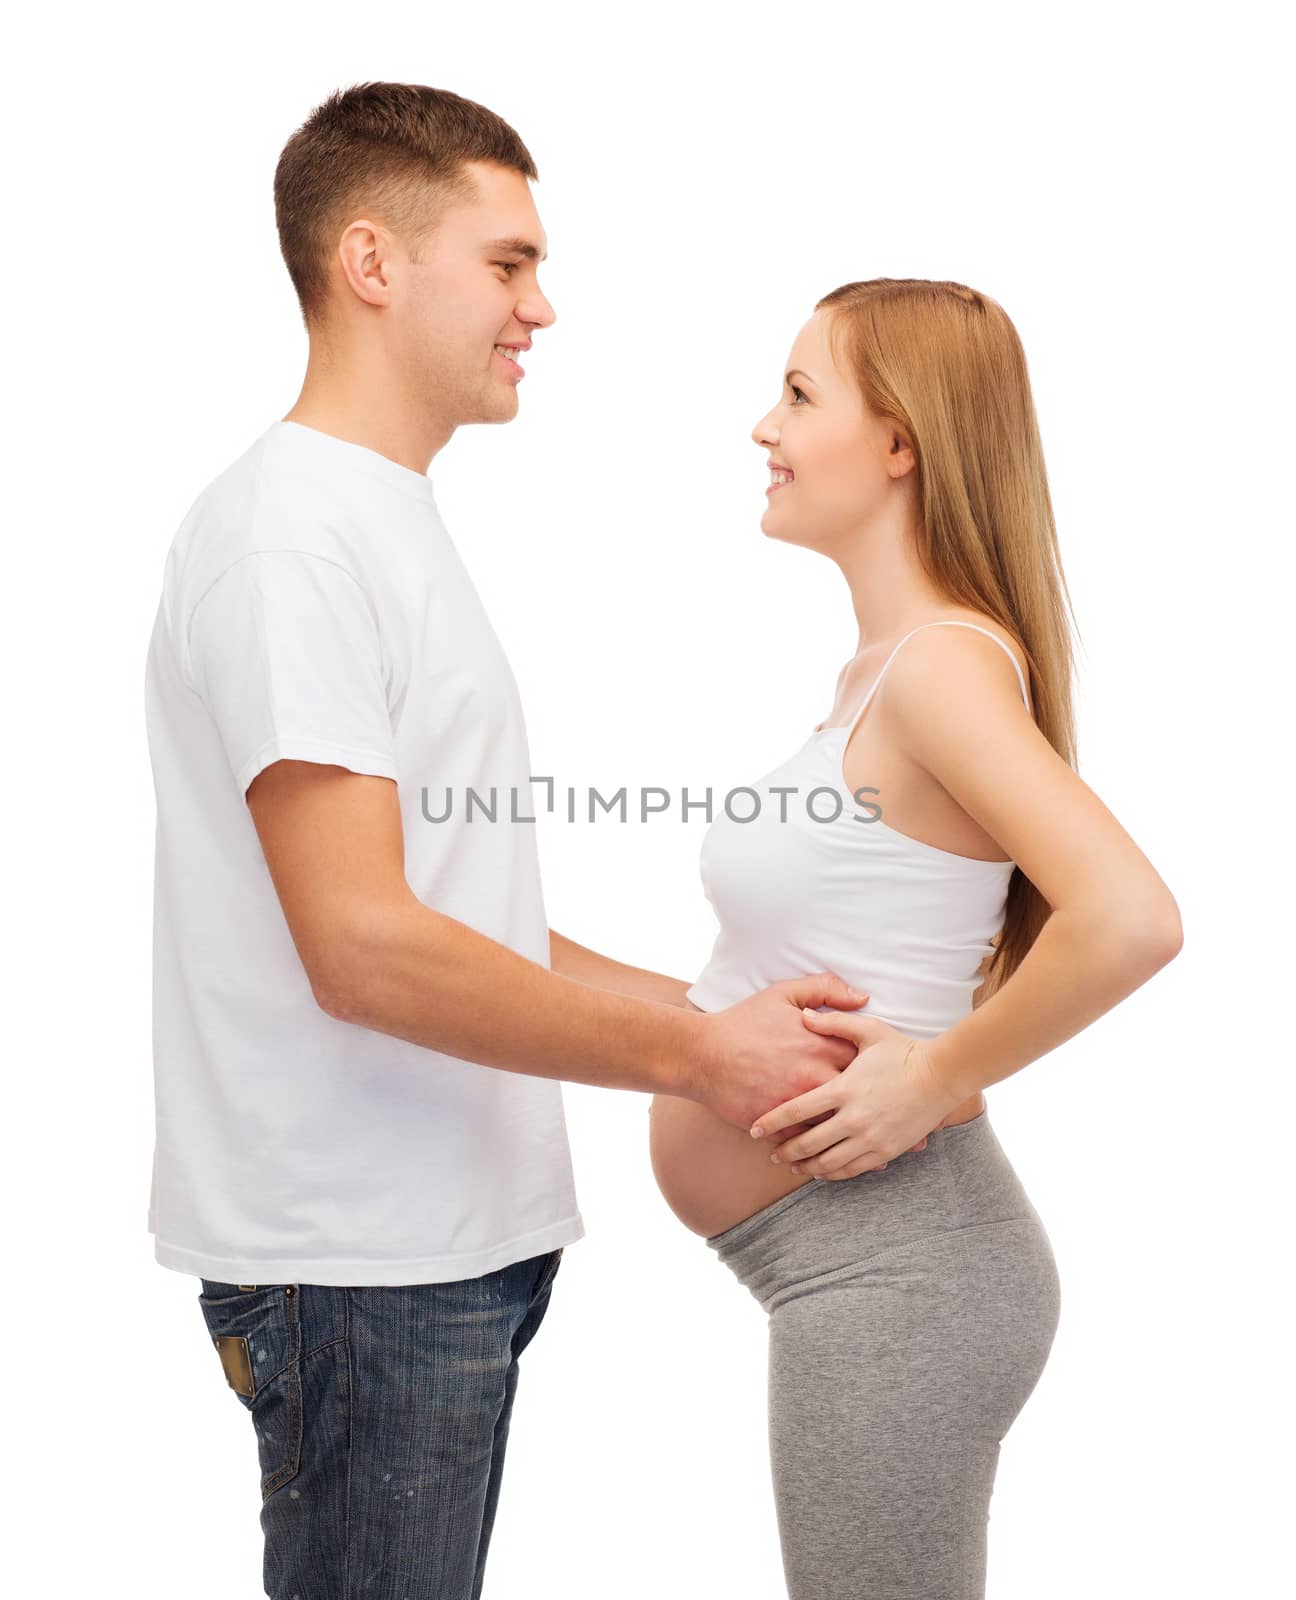 pregnancy, parenthood and happiness concept - happy young family expecting child looking at each other